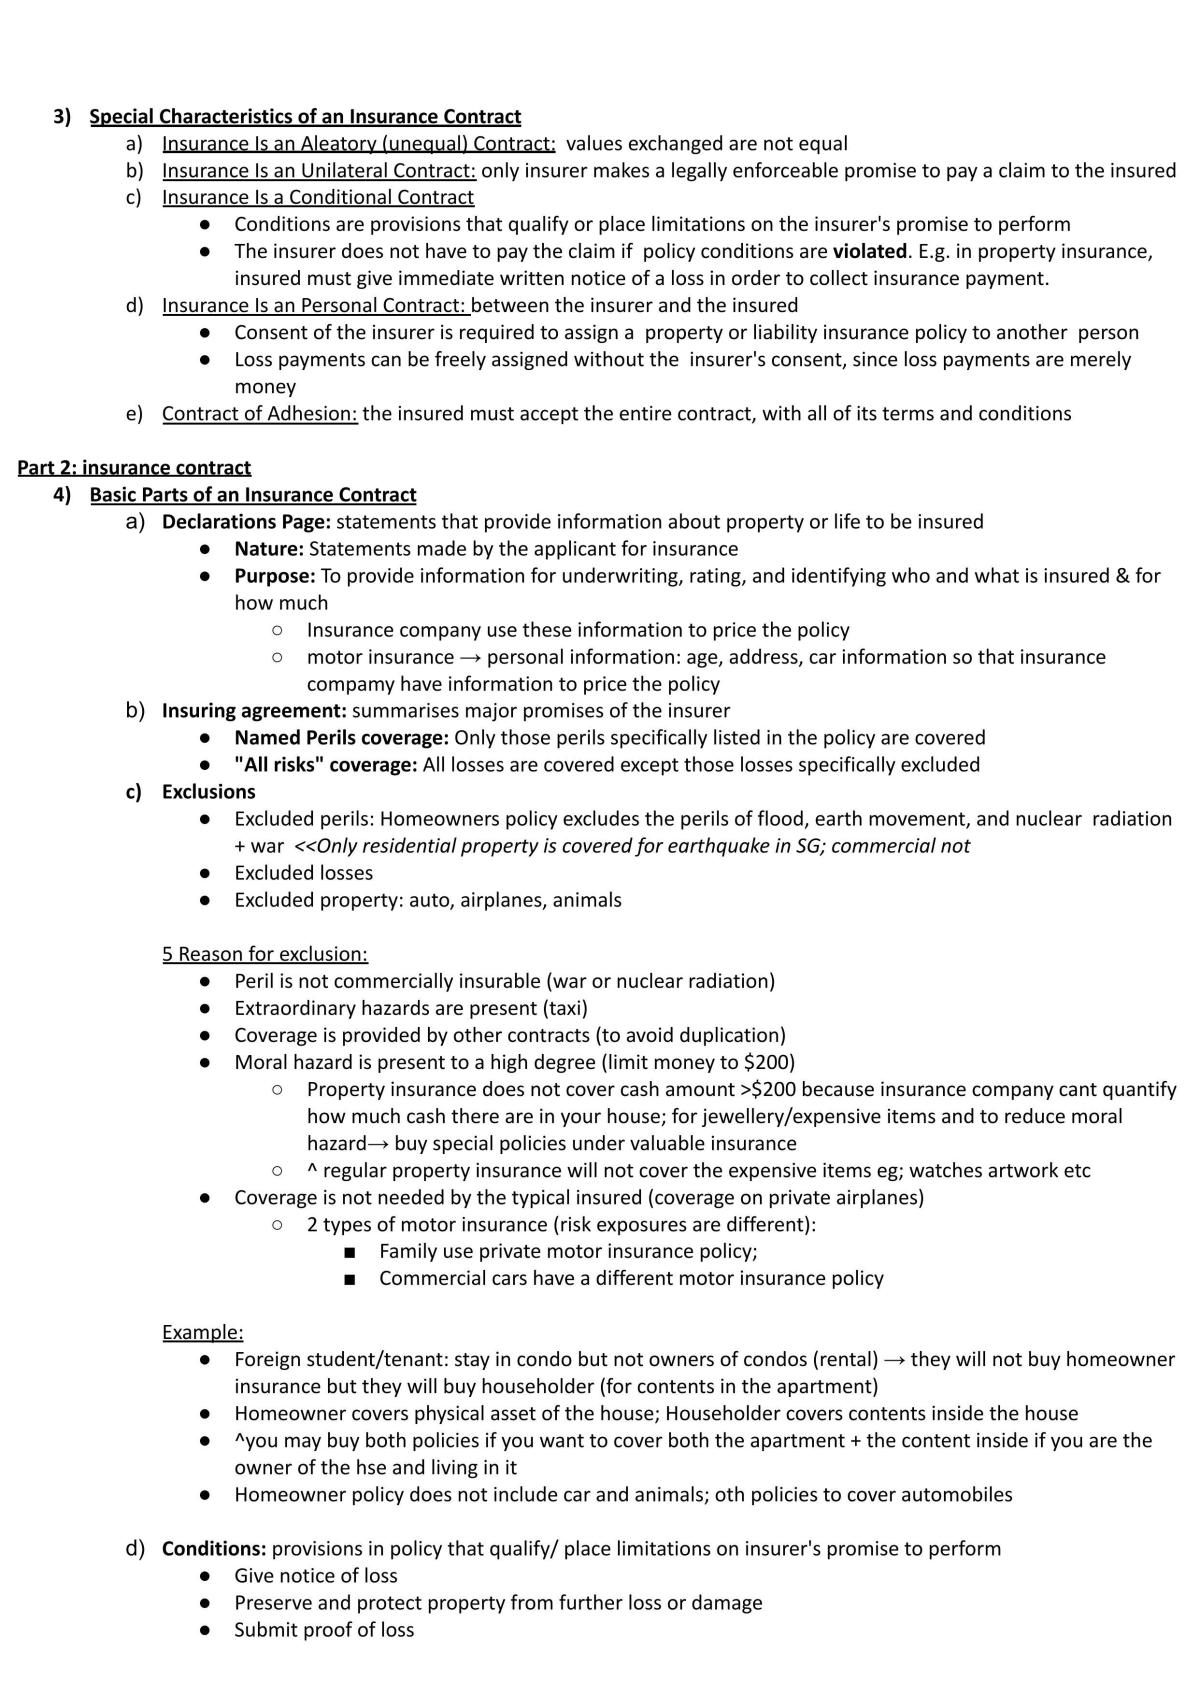 FIN3715 Risk and Insurance Notes - Page 41